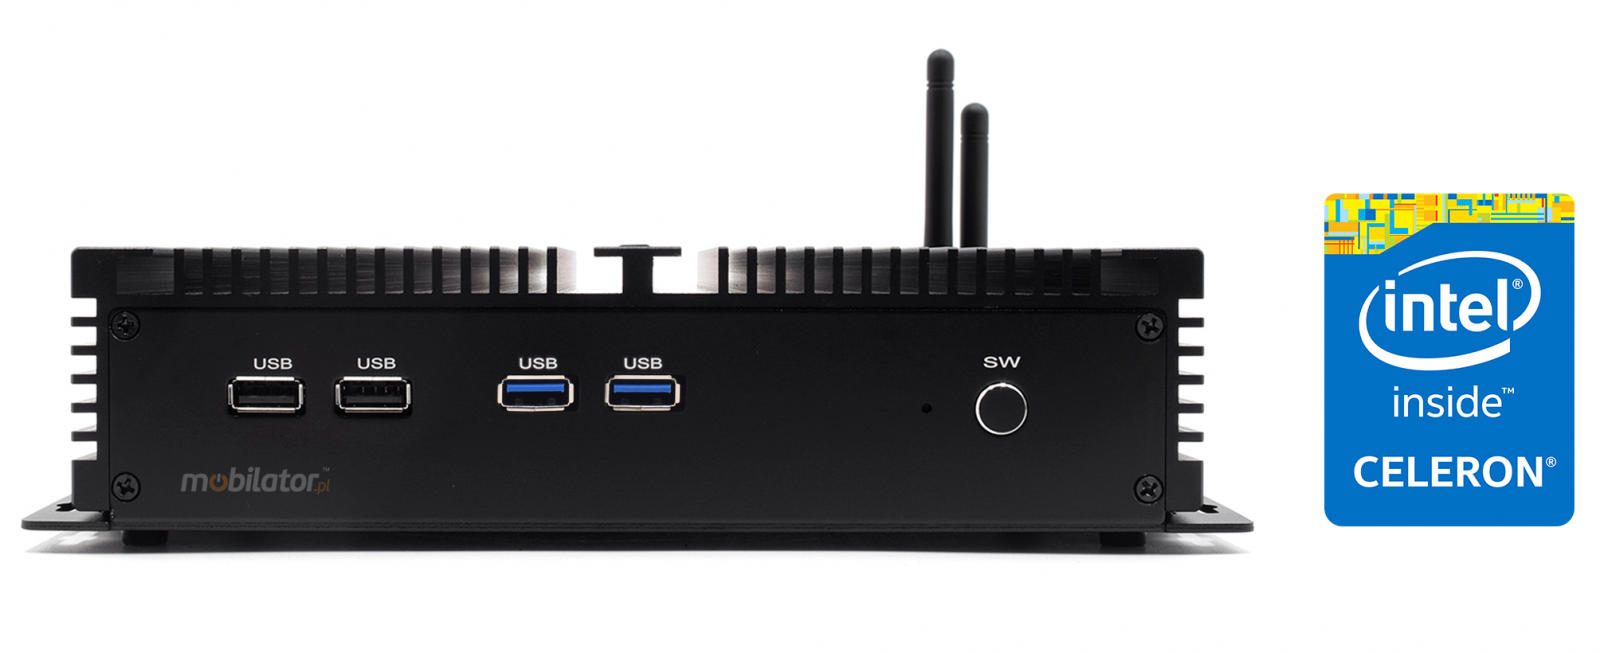 HyBOX K4 Intel Celeron a small reliable and fast mini pc with a powerful processor